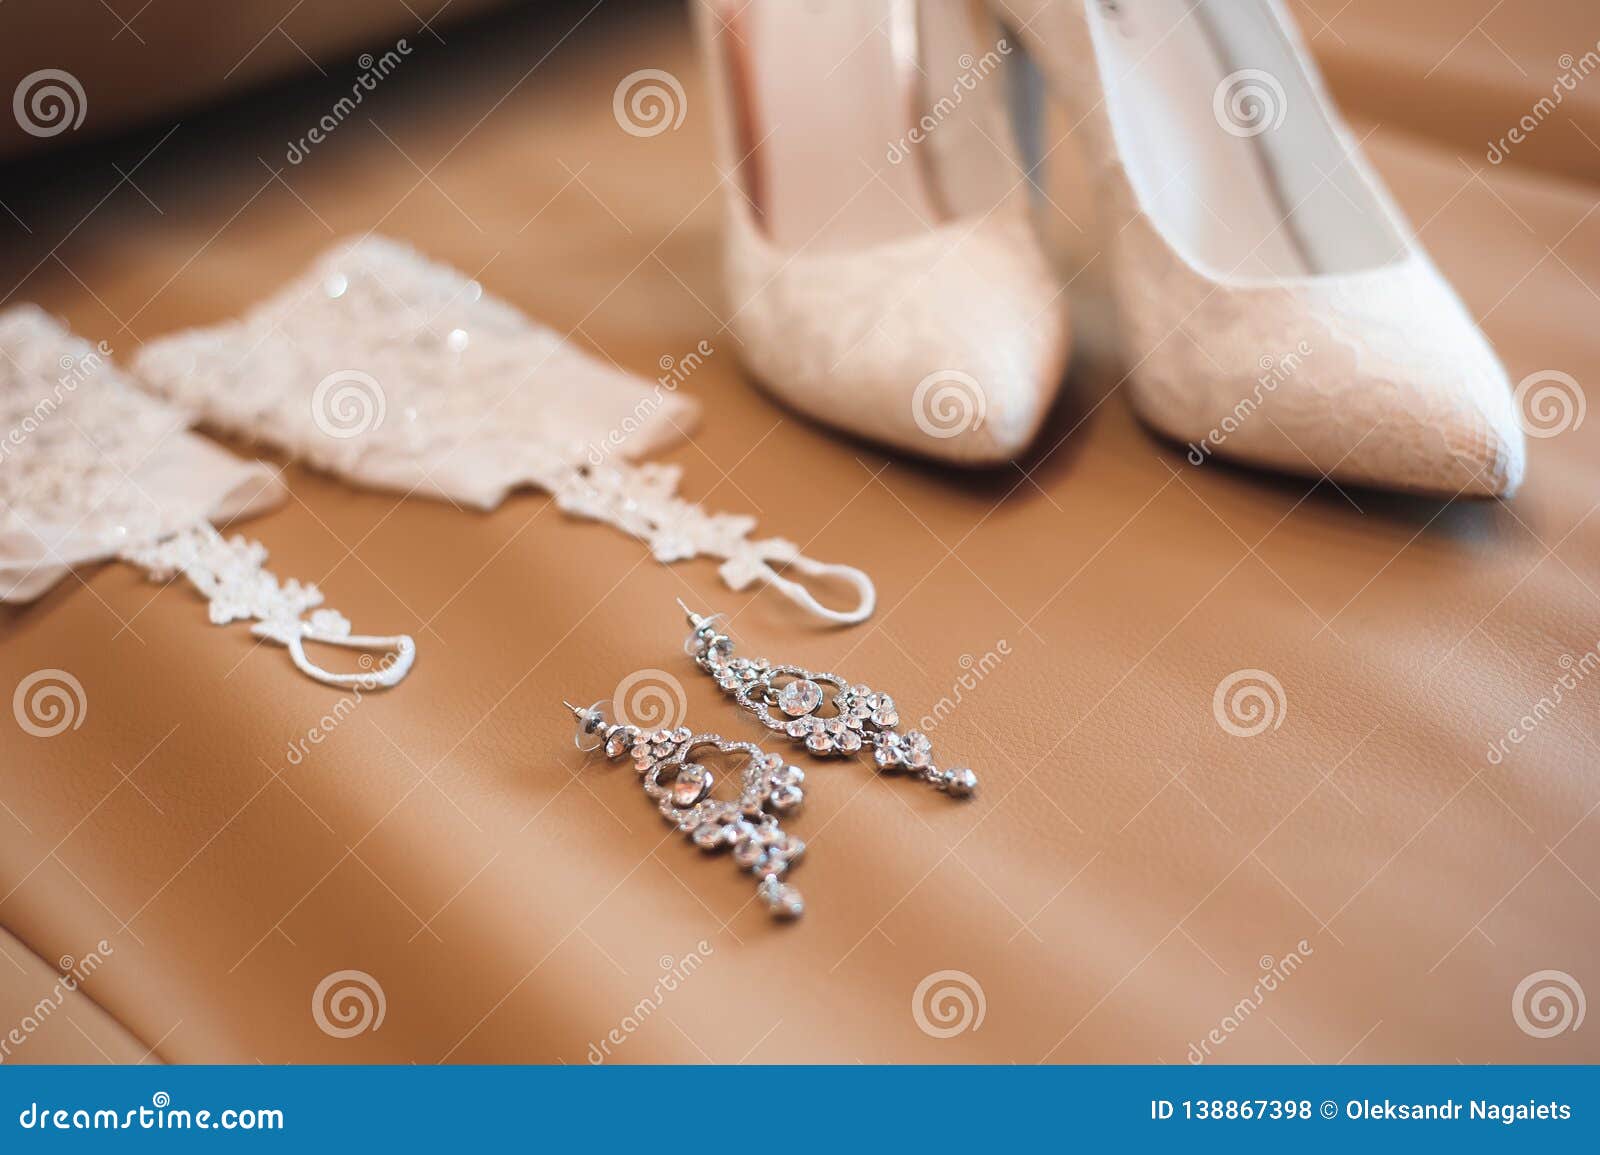 Bride Wedding Details - Wedding Shoes As a Backgrond Stock Photo ...